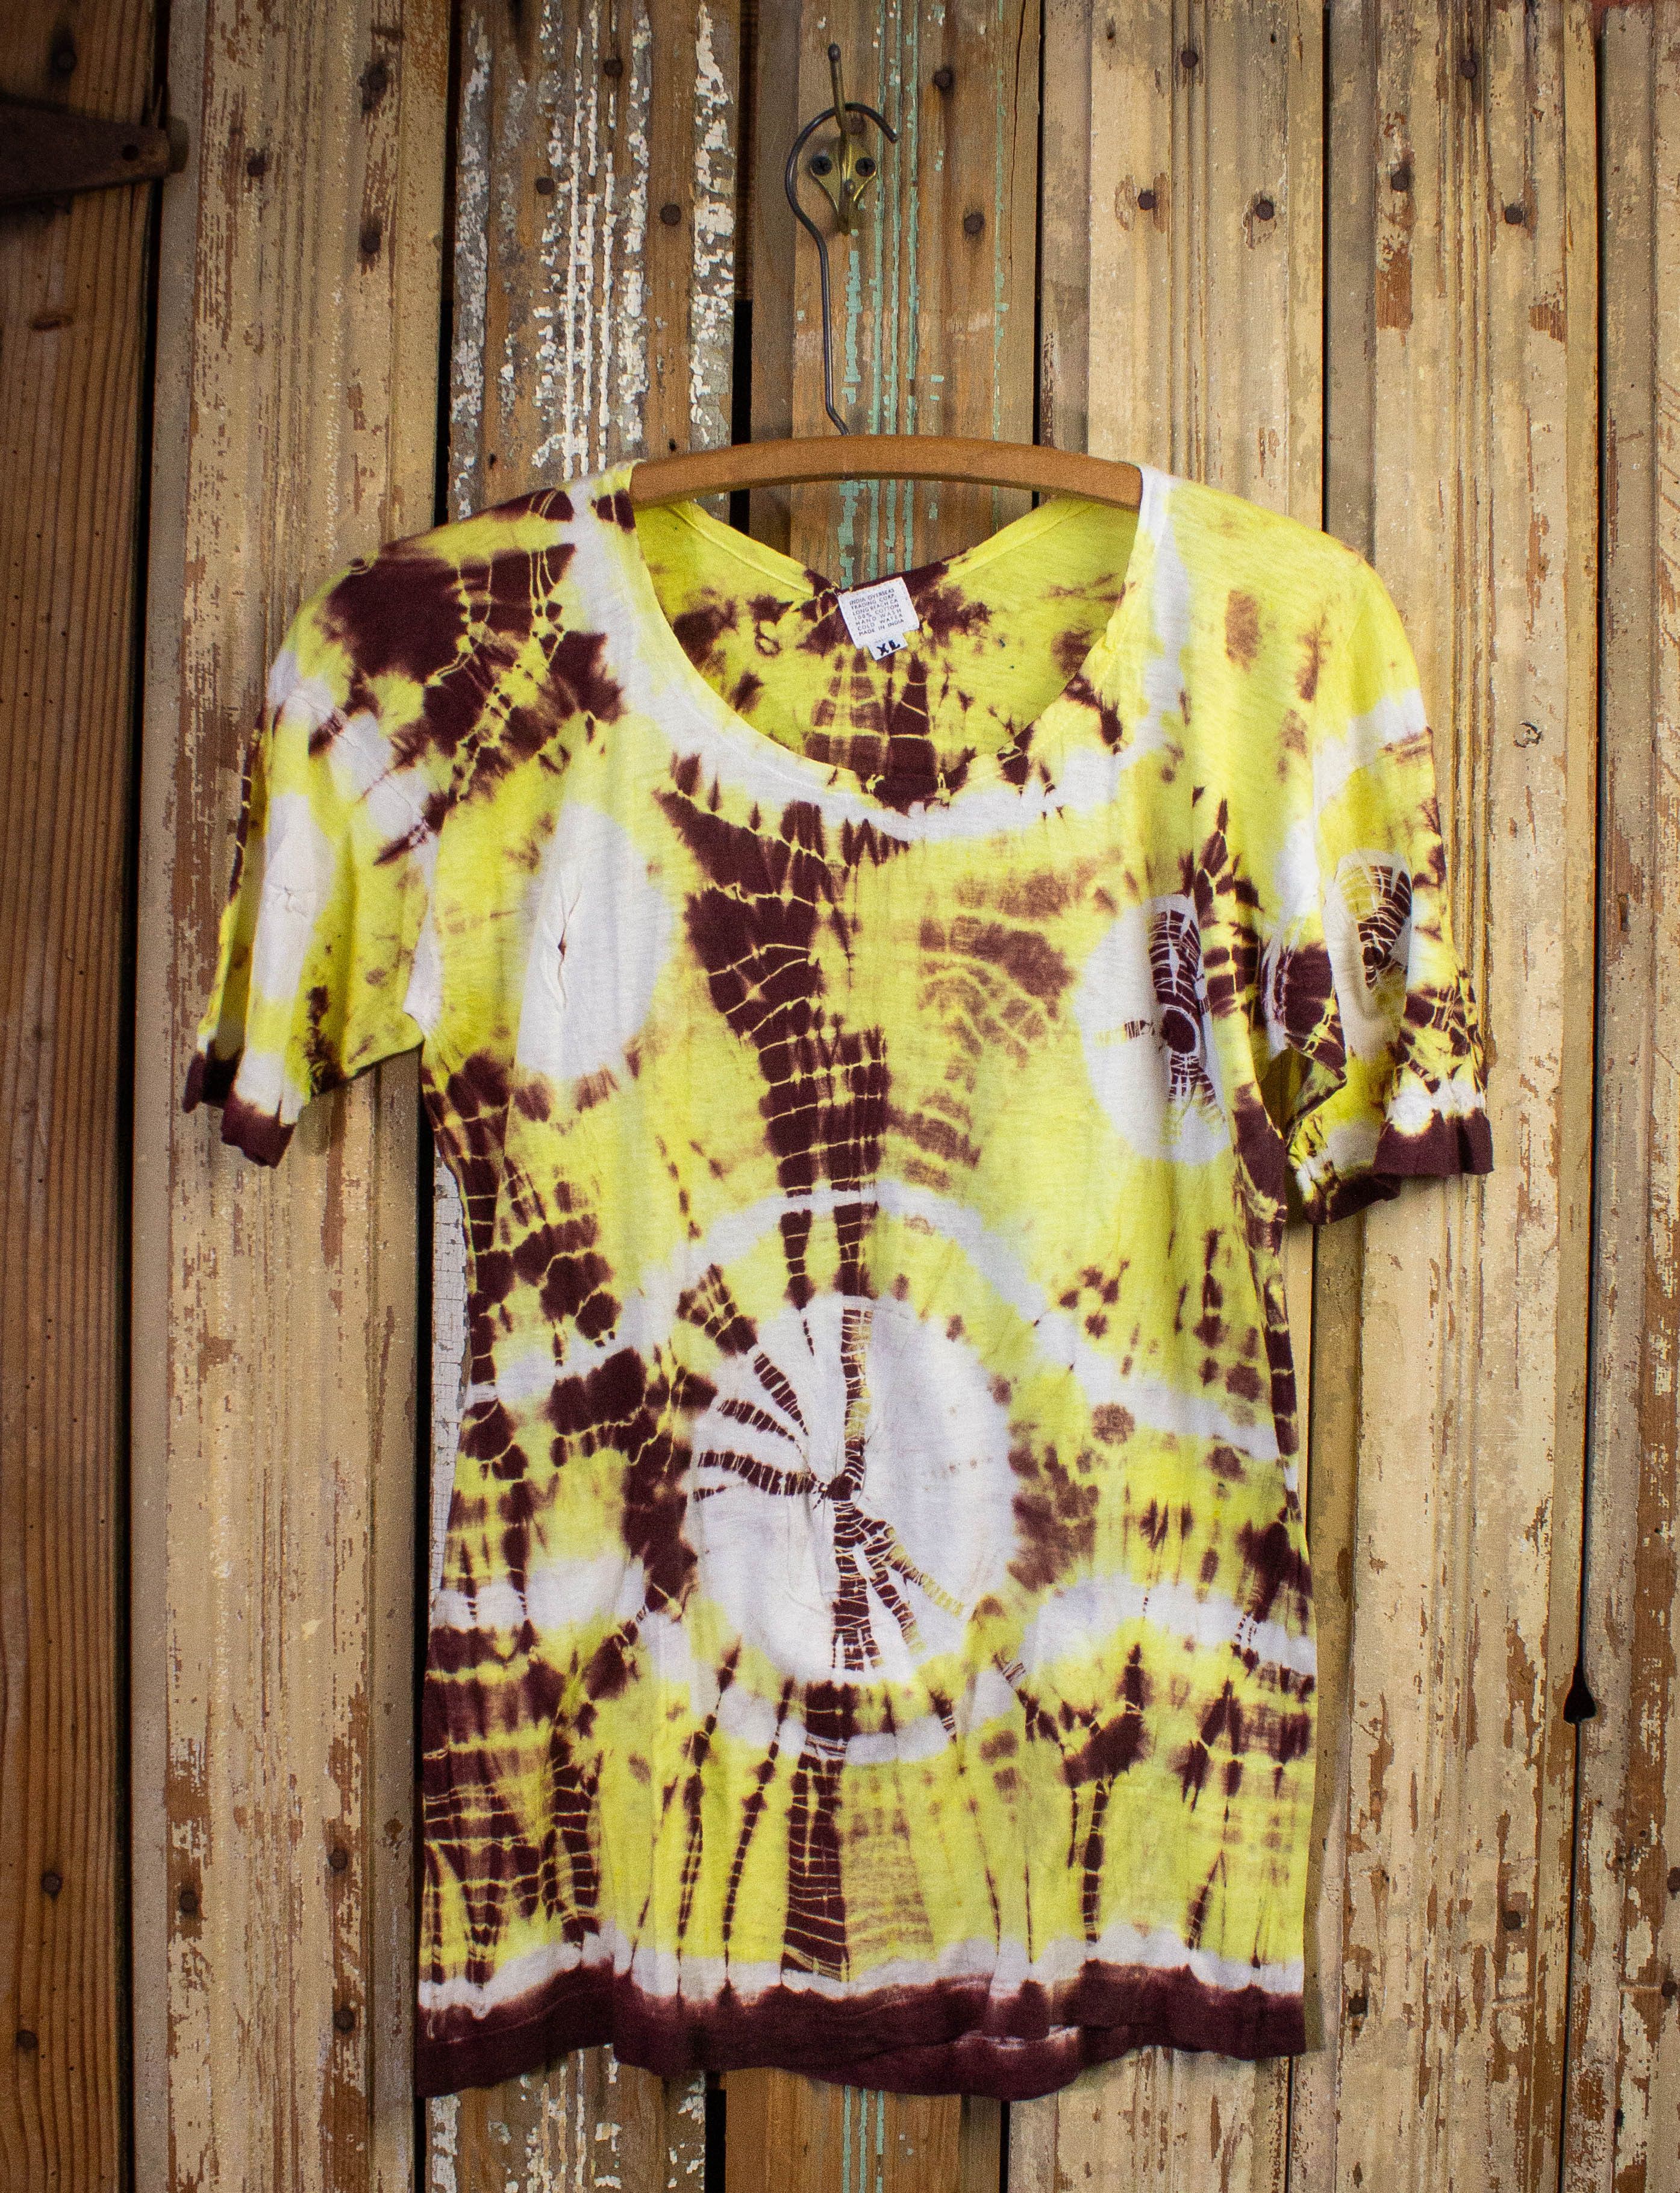 Vintage Vintage Yellow and Brown Tie Dye Shirt 70s Size US S / EU 44-46 / 1 - 1 Preview